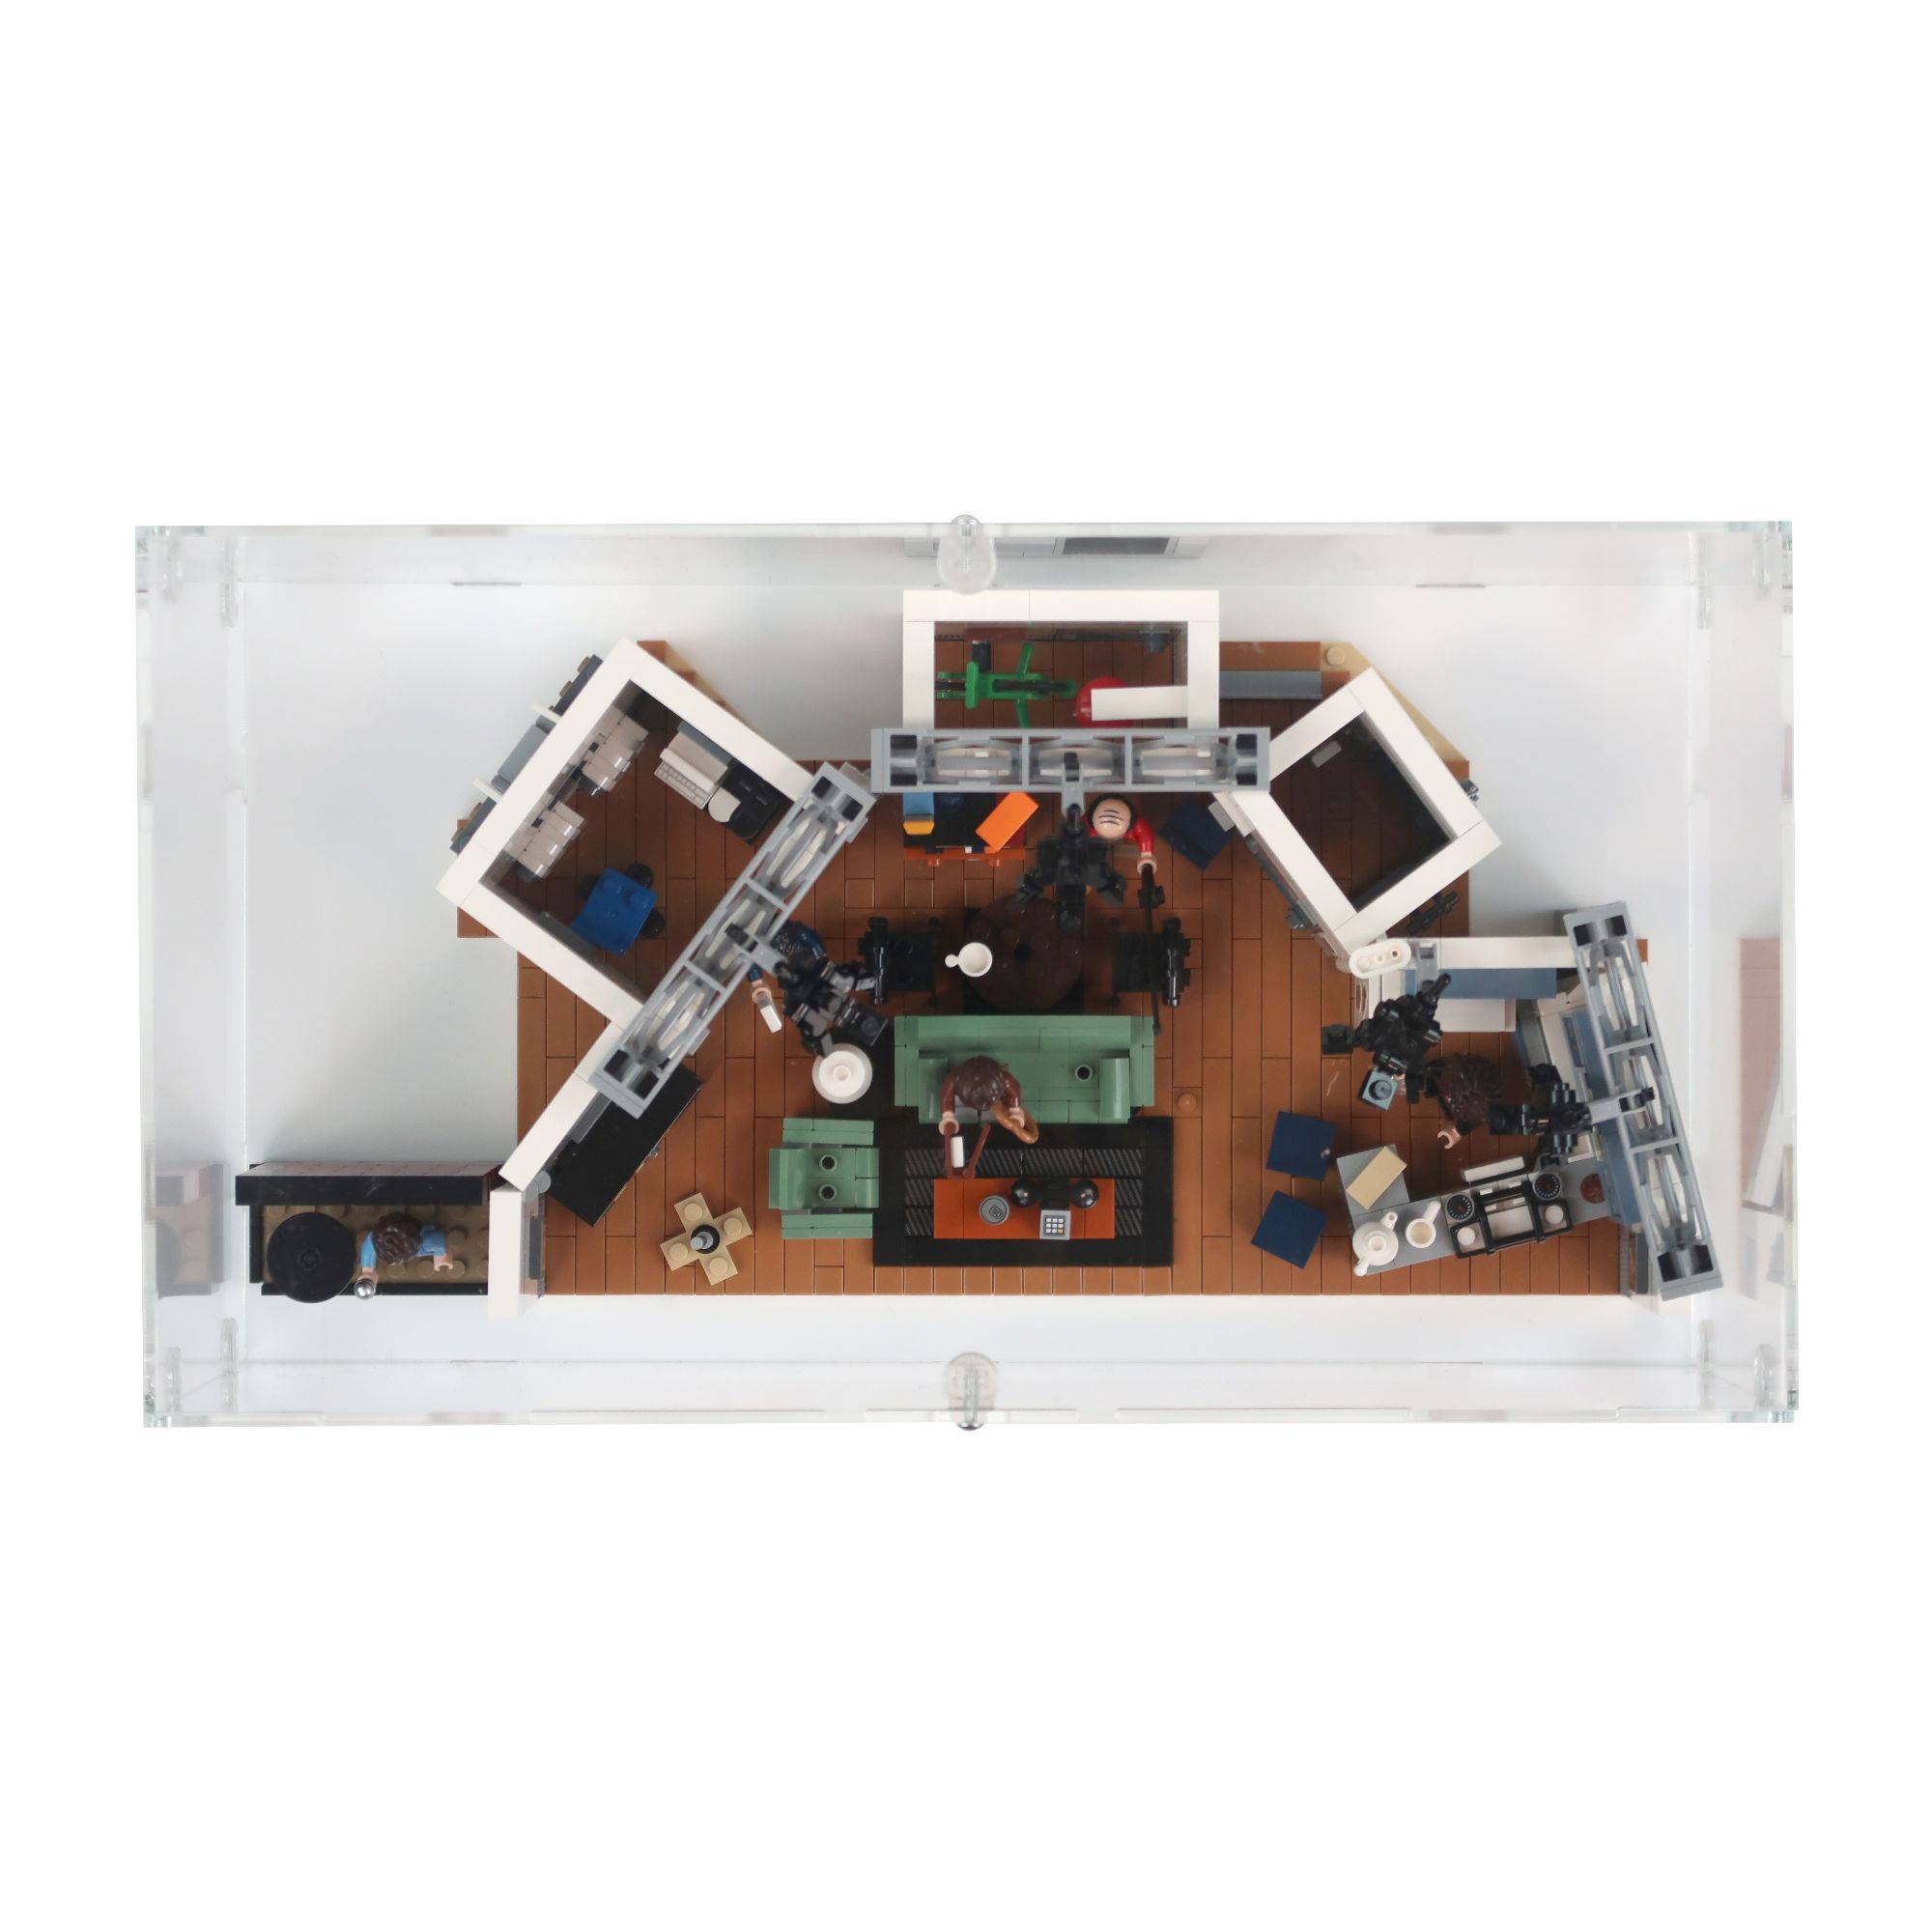 Acrylic Displays for your Lego Models-Lego 21328 Seinfeld